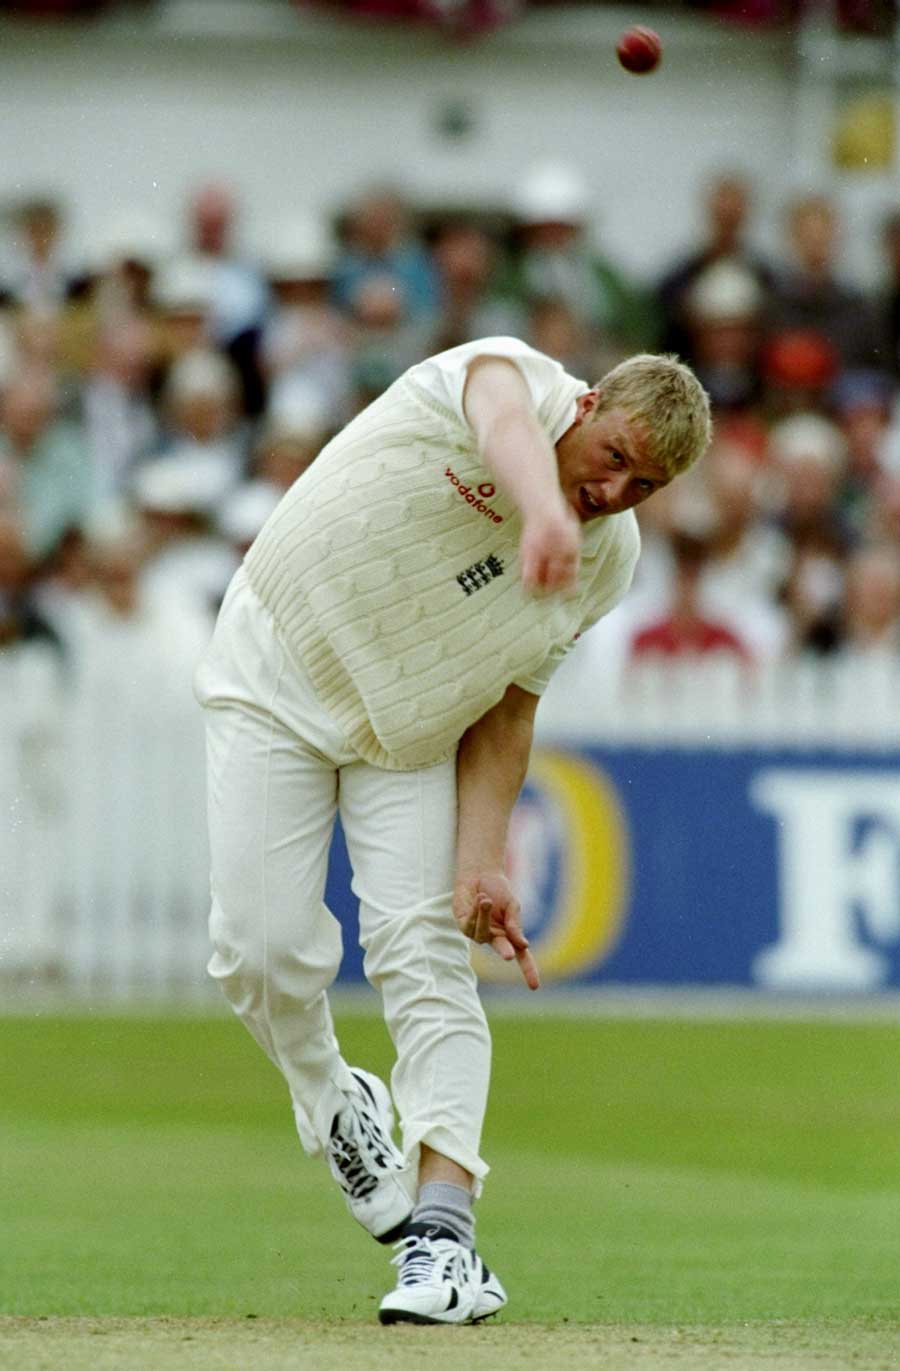 Andrew Flintoff sends down a delivery